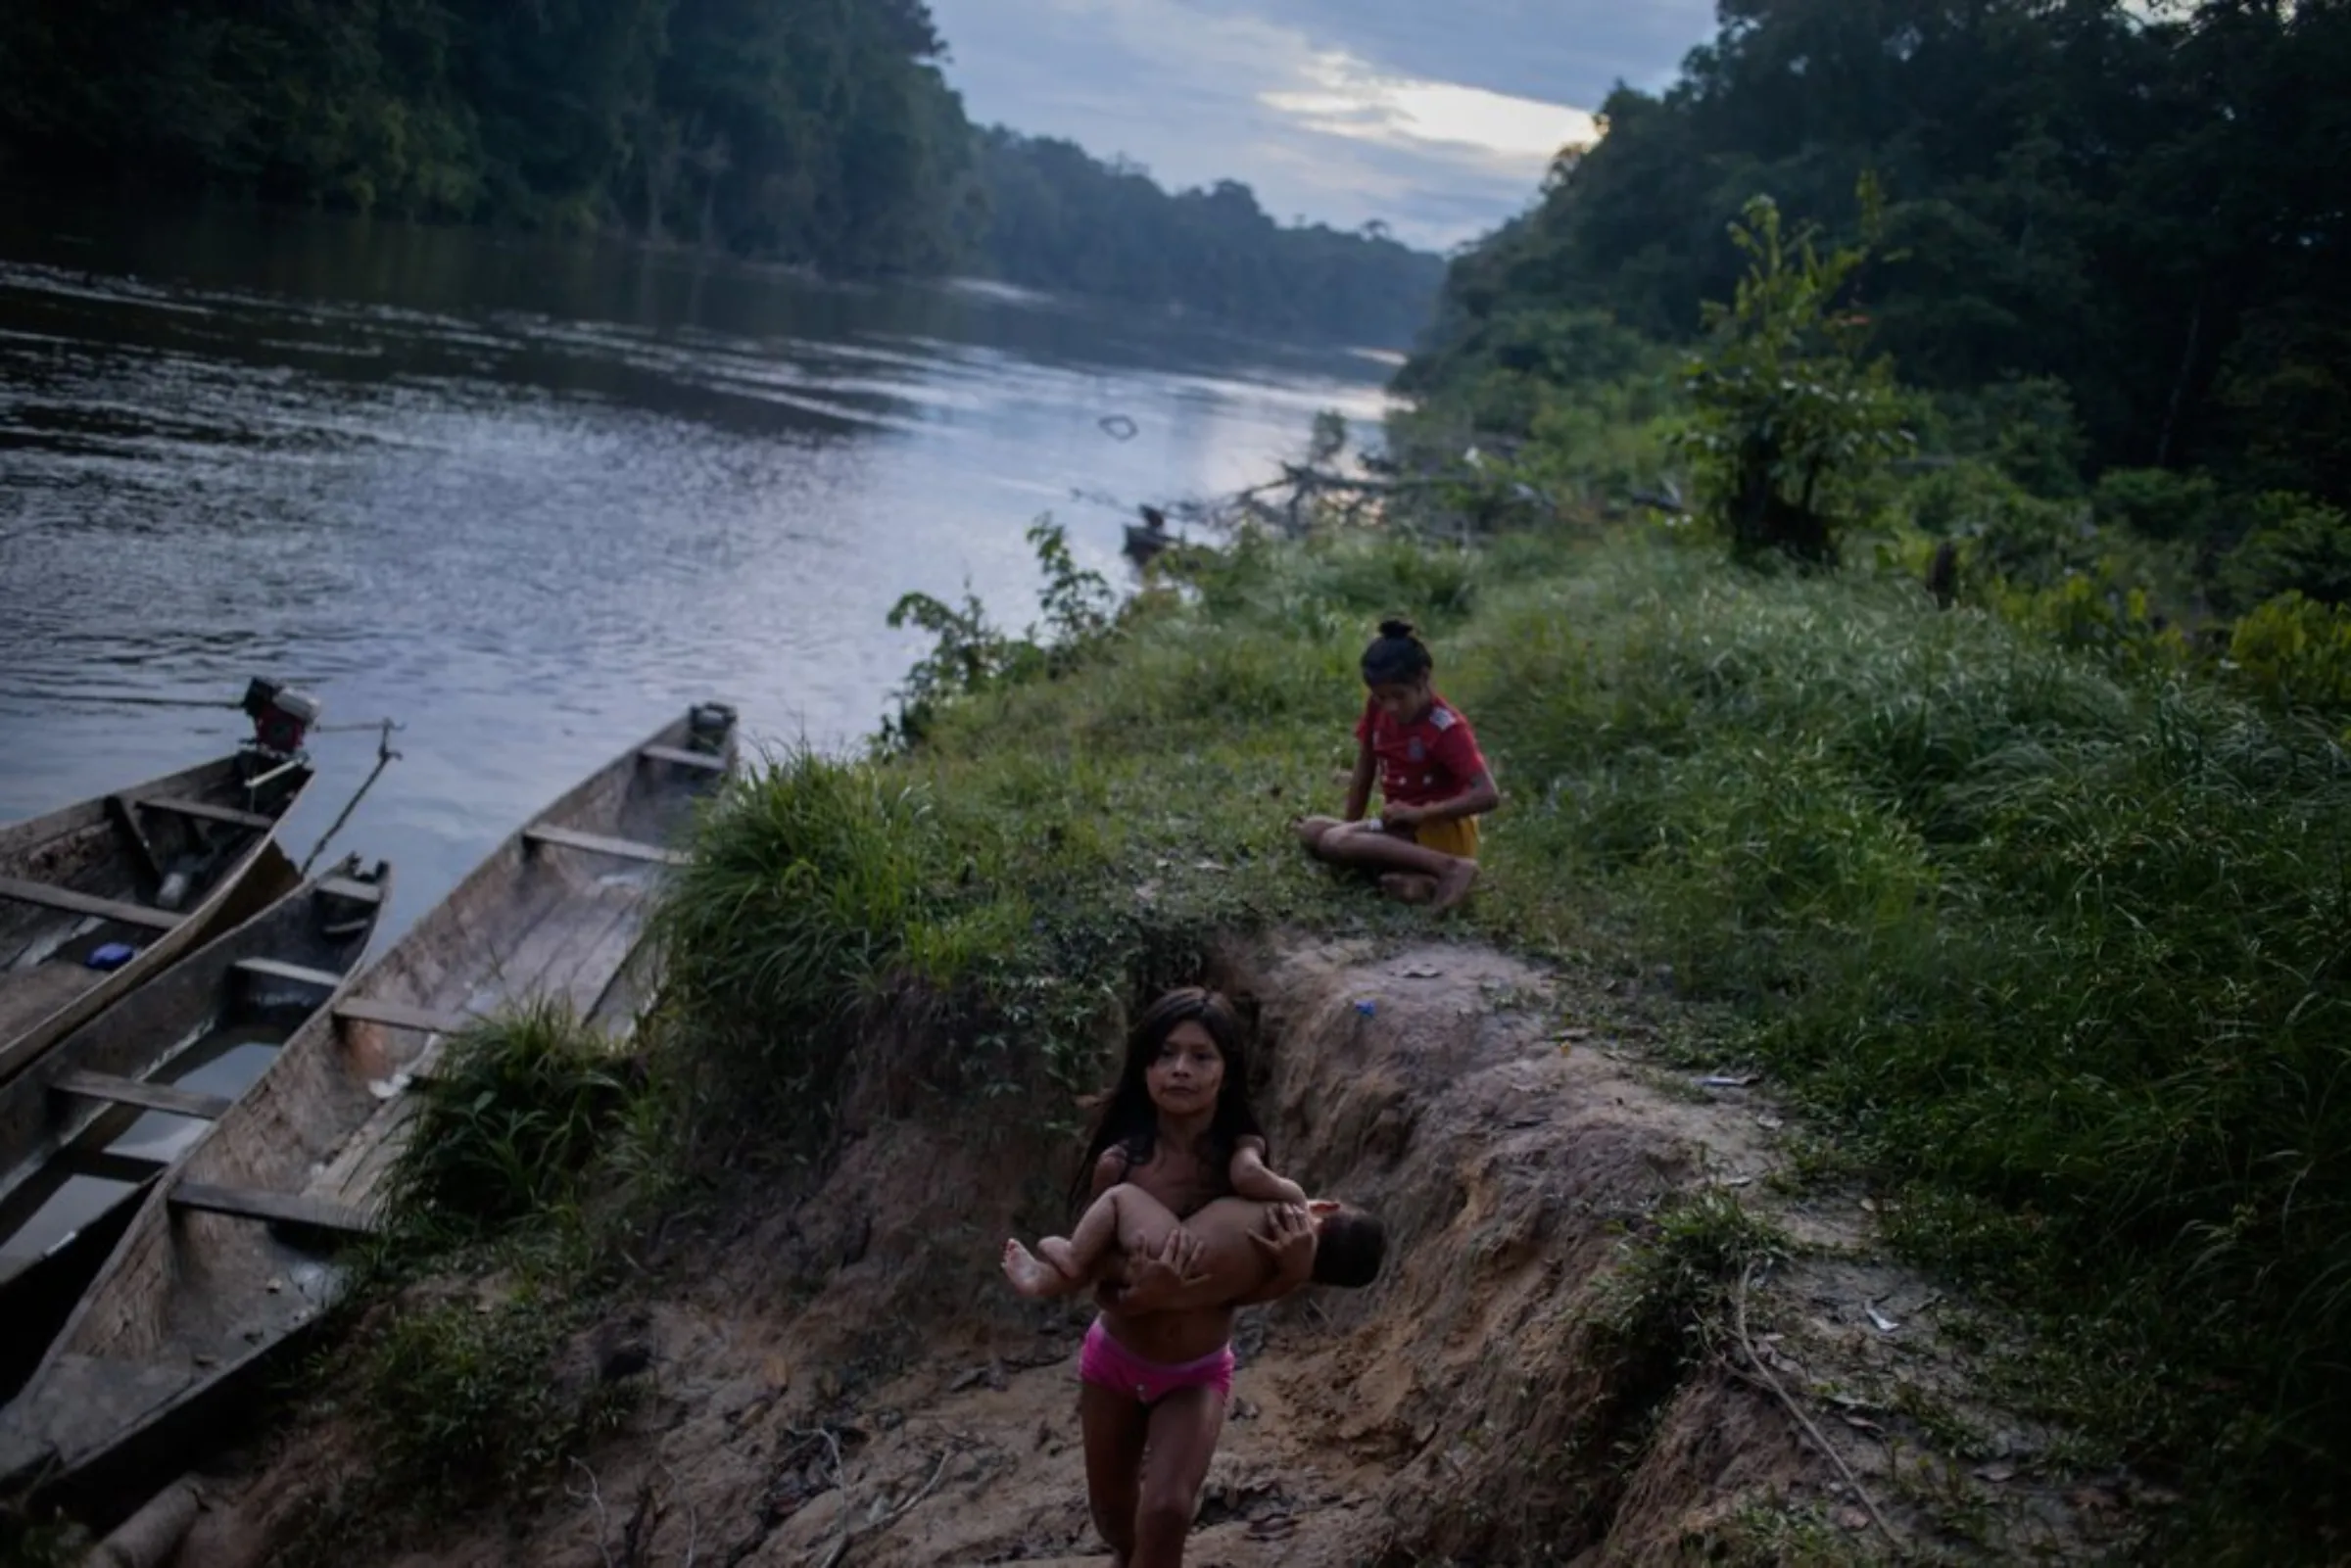 Indigenous children work and play along the bank of the Miriti-Parana River at the Puerto Libre community in Colombia’s southeast Amazonas province. Dugout canoes are the main form of transport in a region with no roads. December 19, 2021